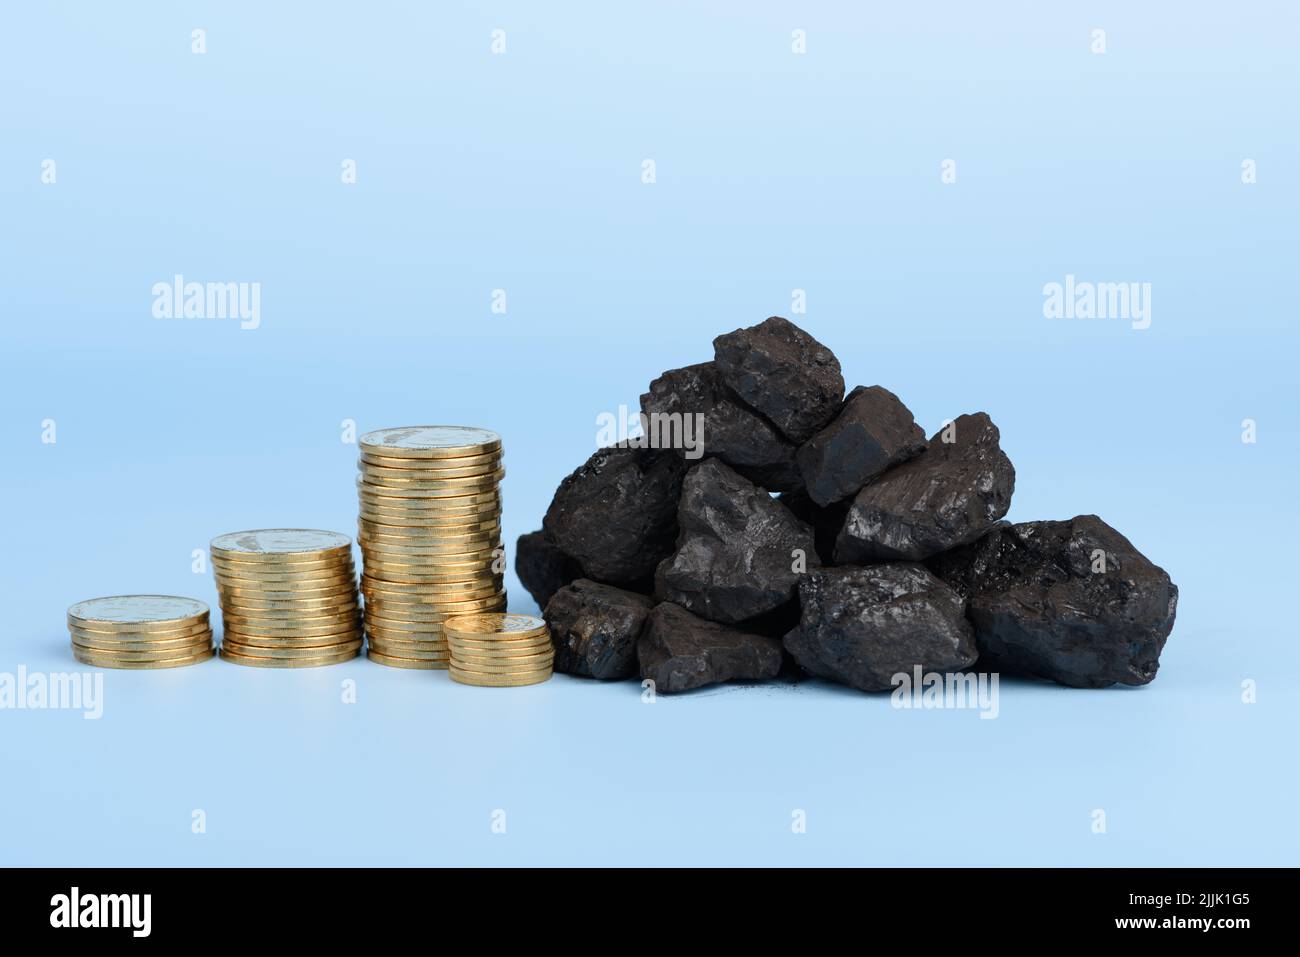 Black hard coal with coins stacks on blue background, fossil fuel price concept Stock Photo